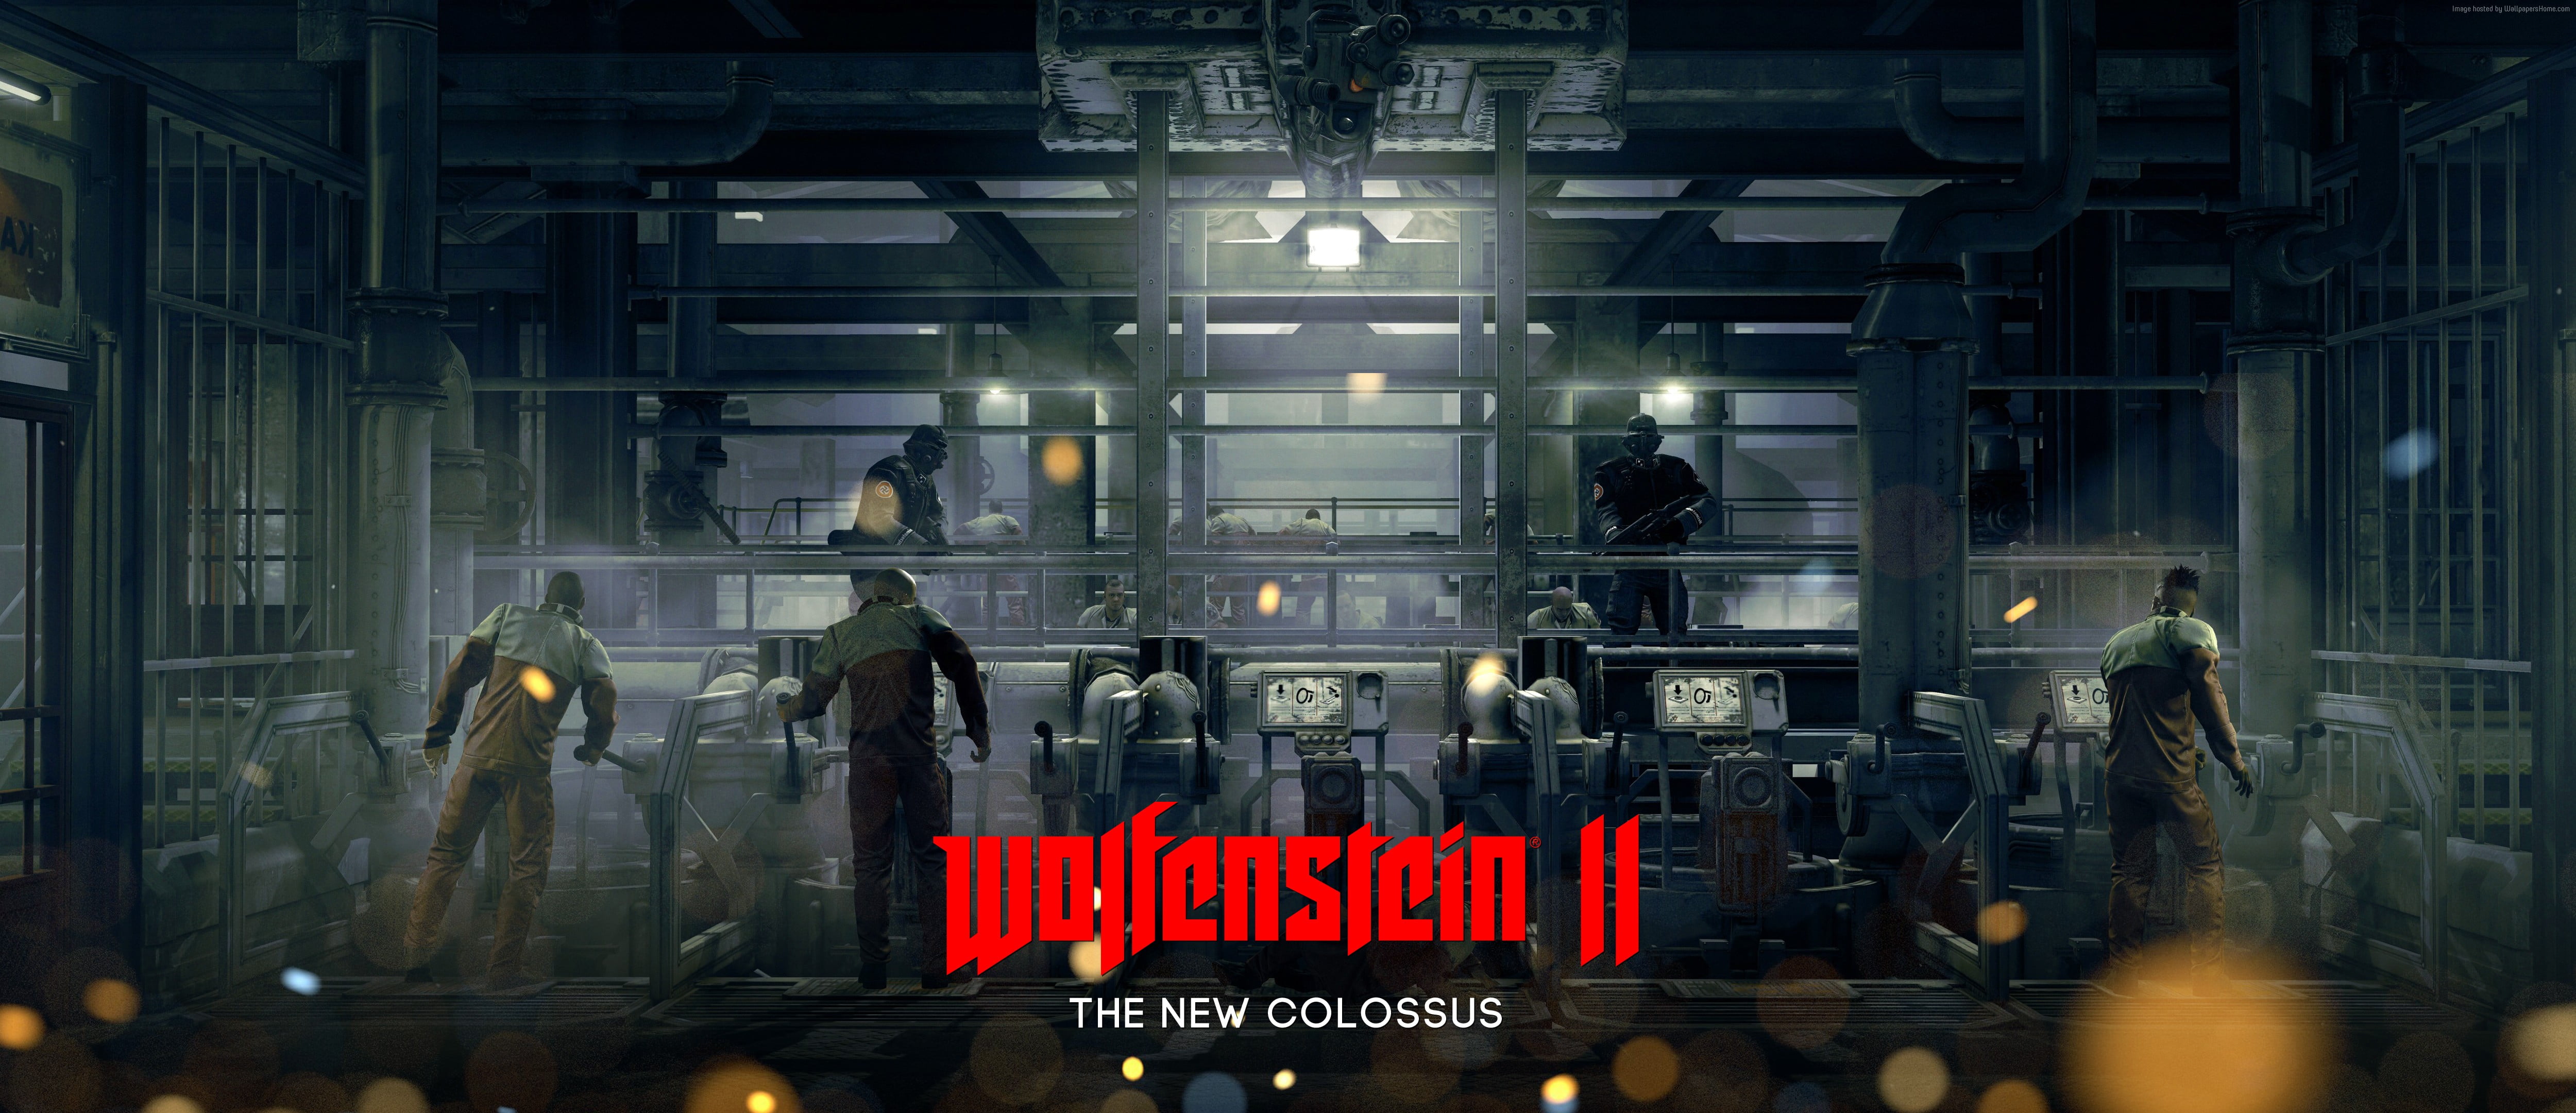 Wolfenstein II The New Colossus game cover HD wallpaper. Wallpaper